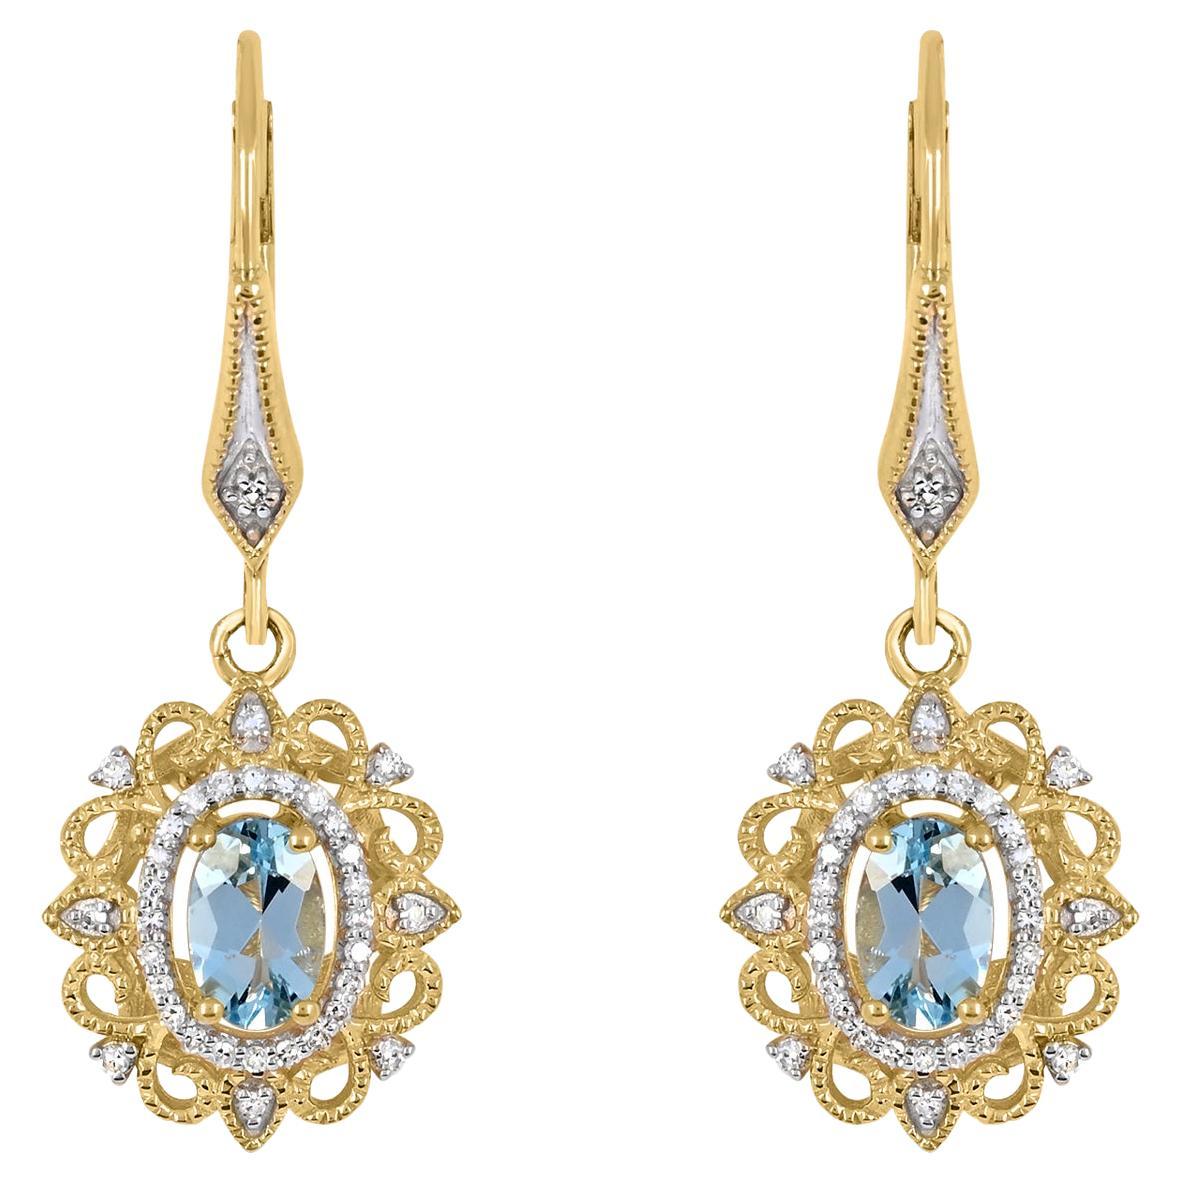 1-1/20 ct. Aquamarine and Diamond Accent Dangle Earrings in 14K Yellow Gold